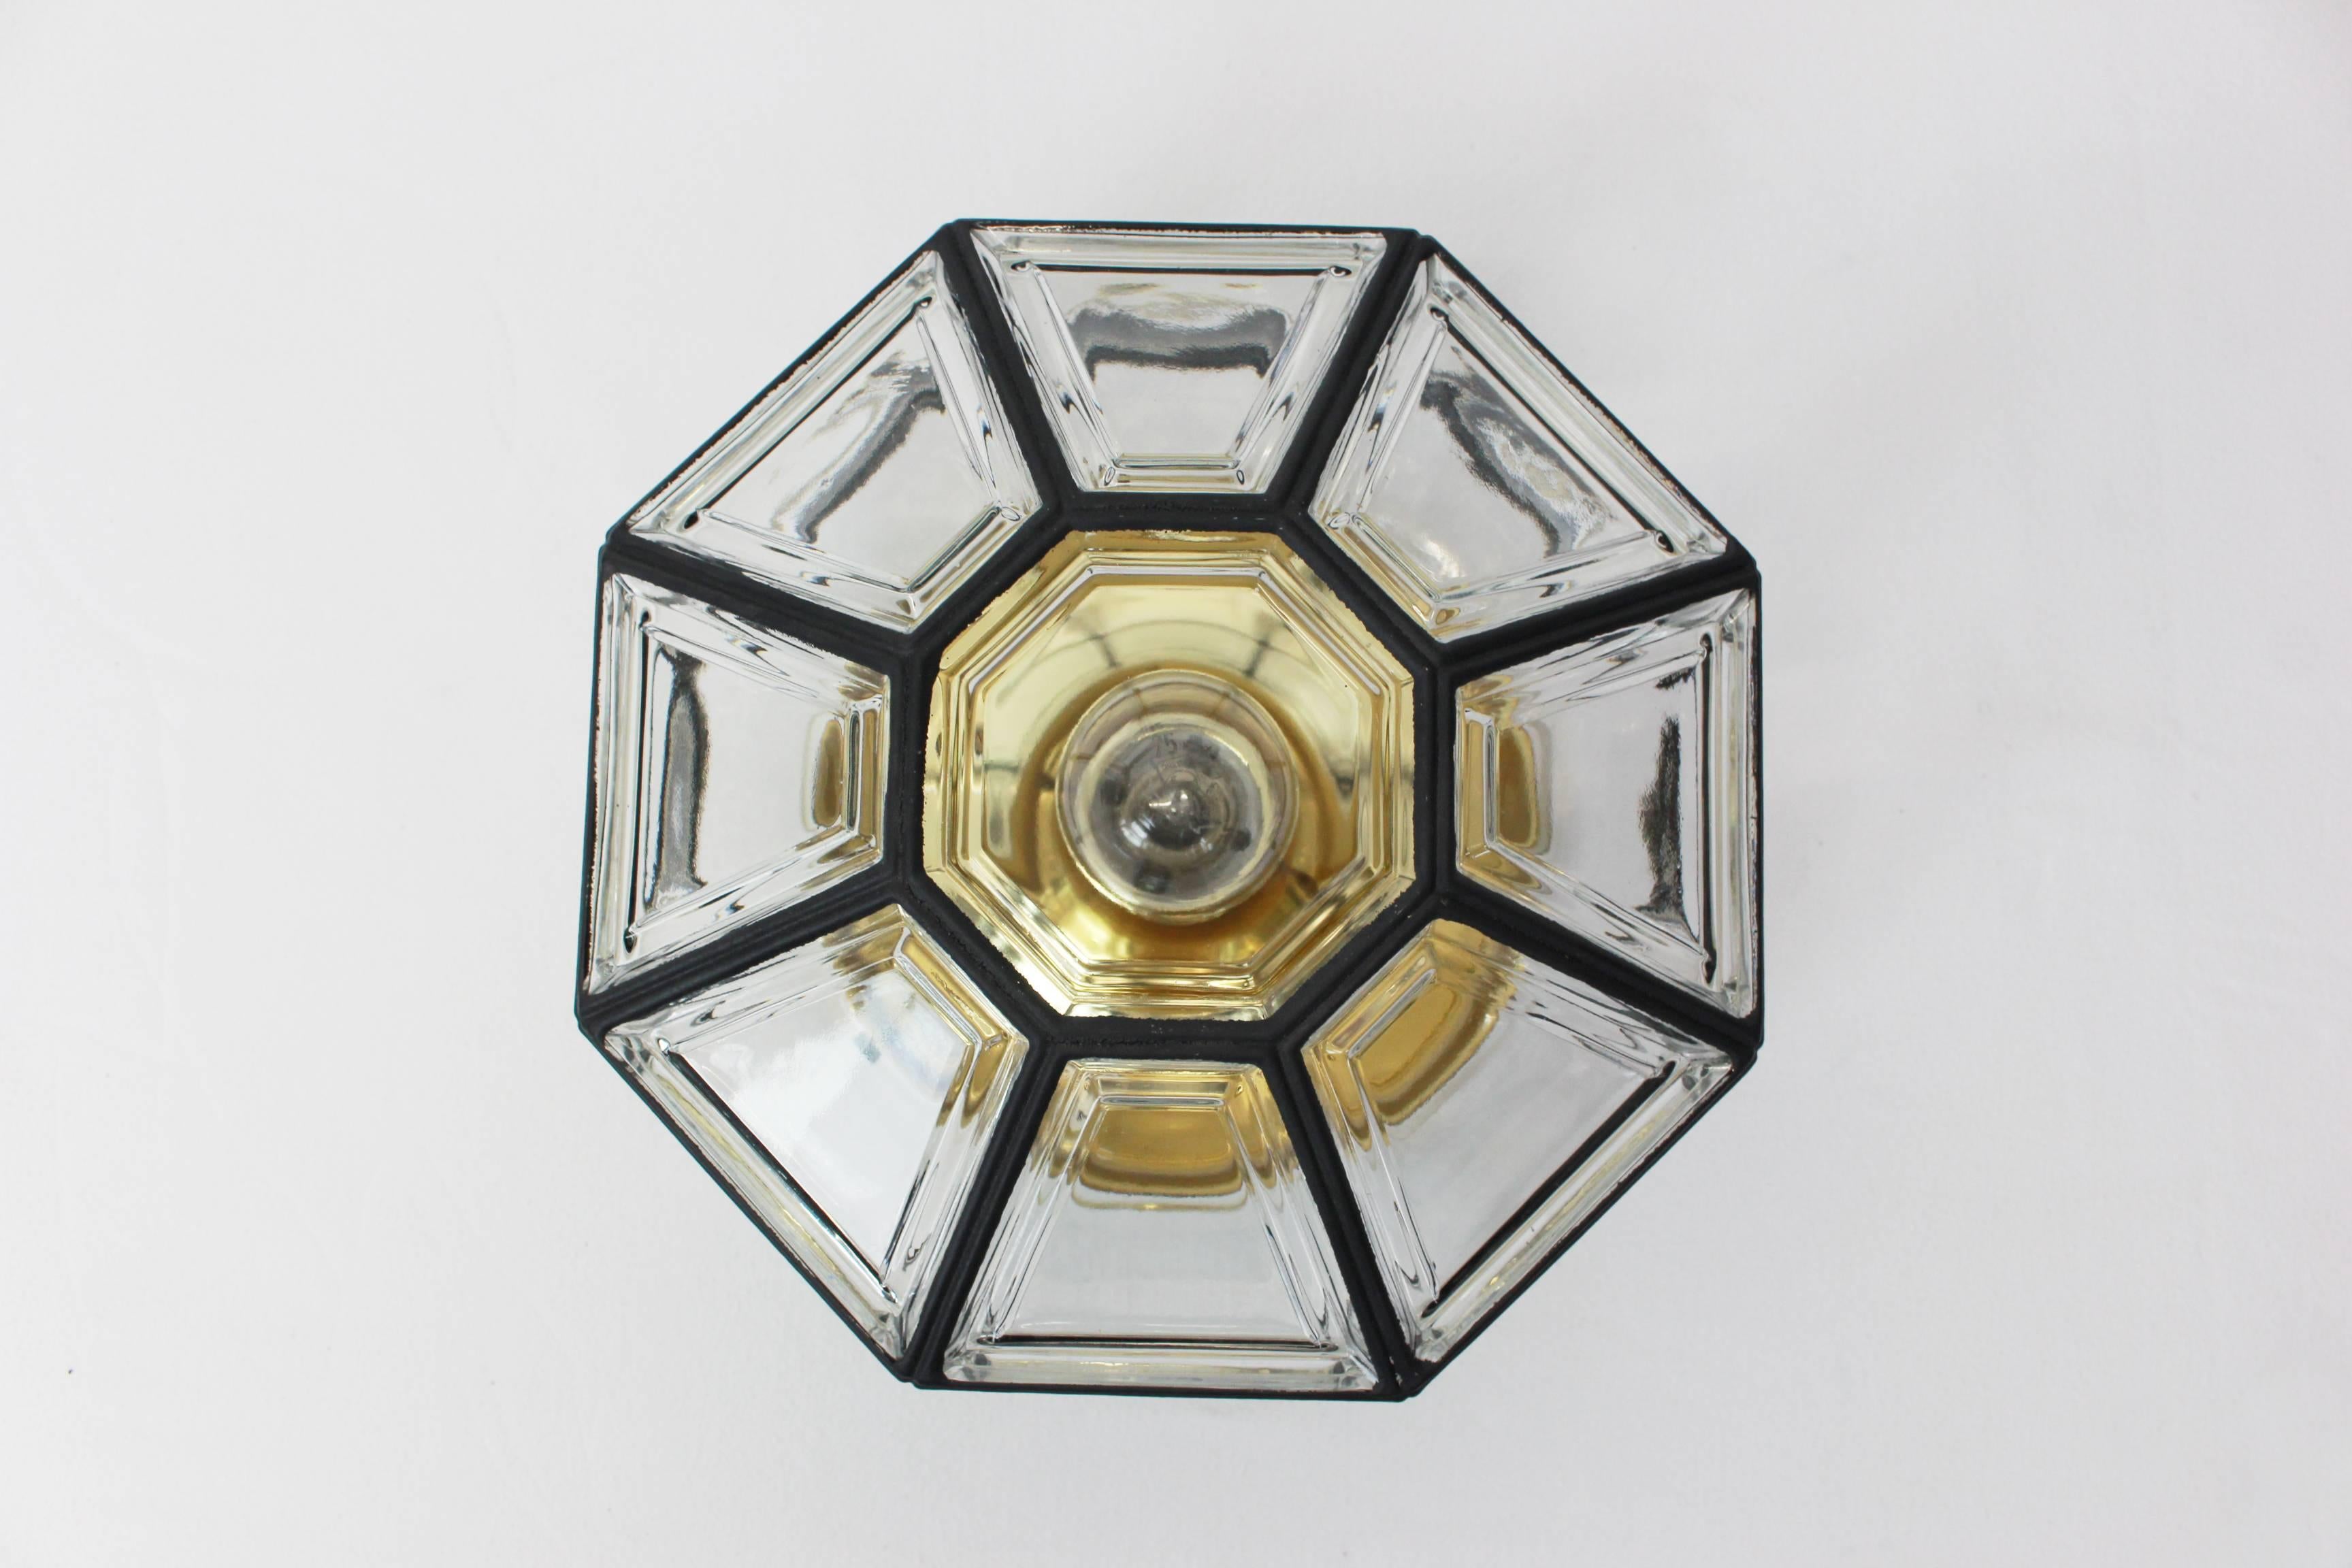 1 of 15 Minimalist iron and clear glass flushmount manufactured by Limburg Glashütte, Germany, circa 1960-1969. Octagonally shaped lantern and multifaceted clear glass.

High quality and in very good condition. Cleaned, well-wired and ready to